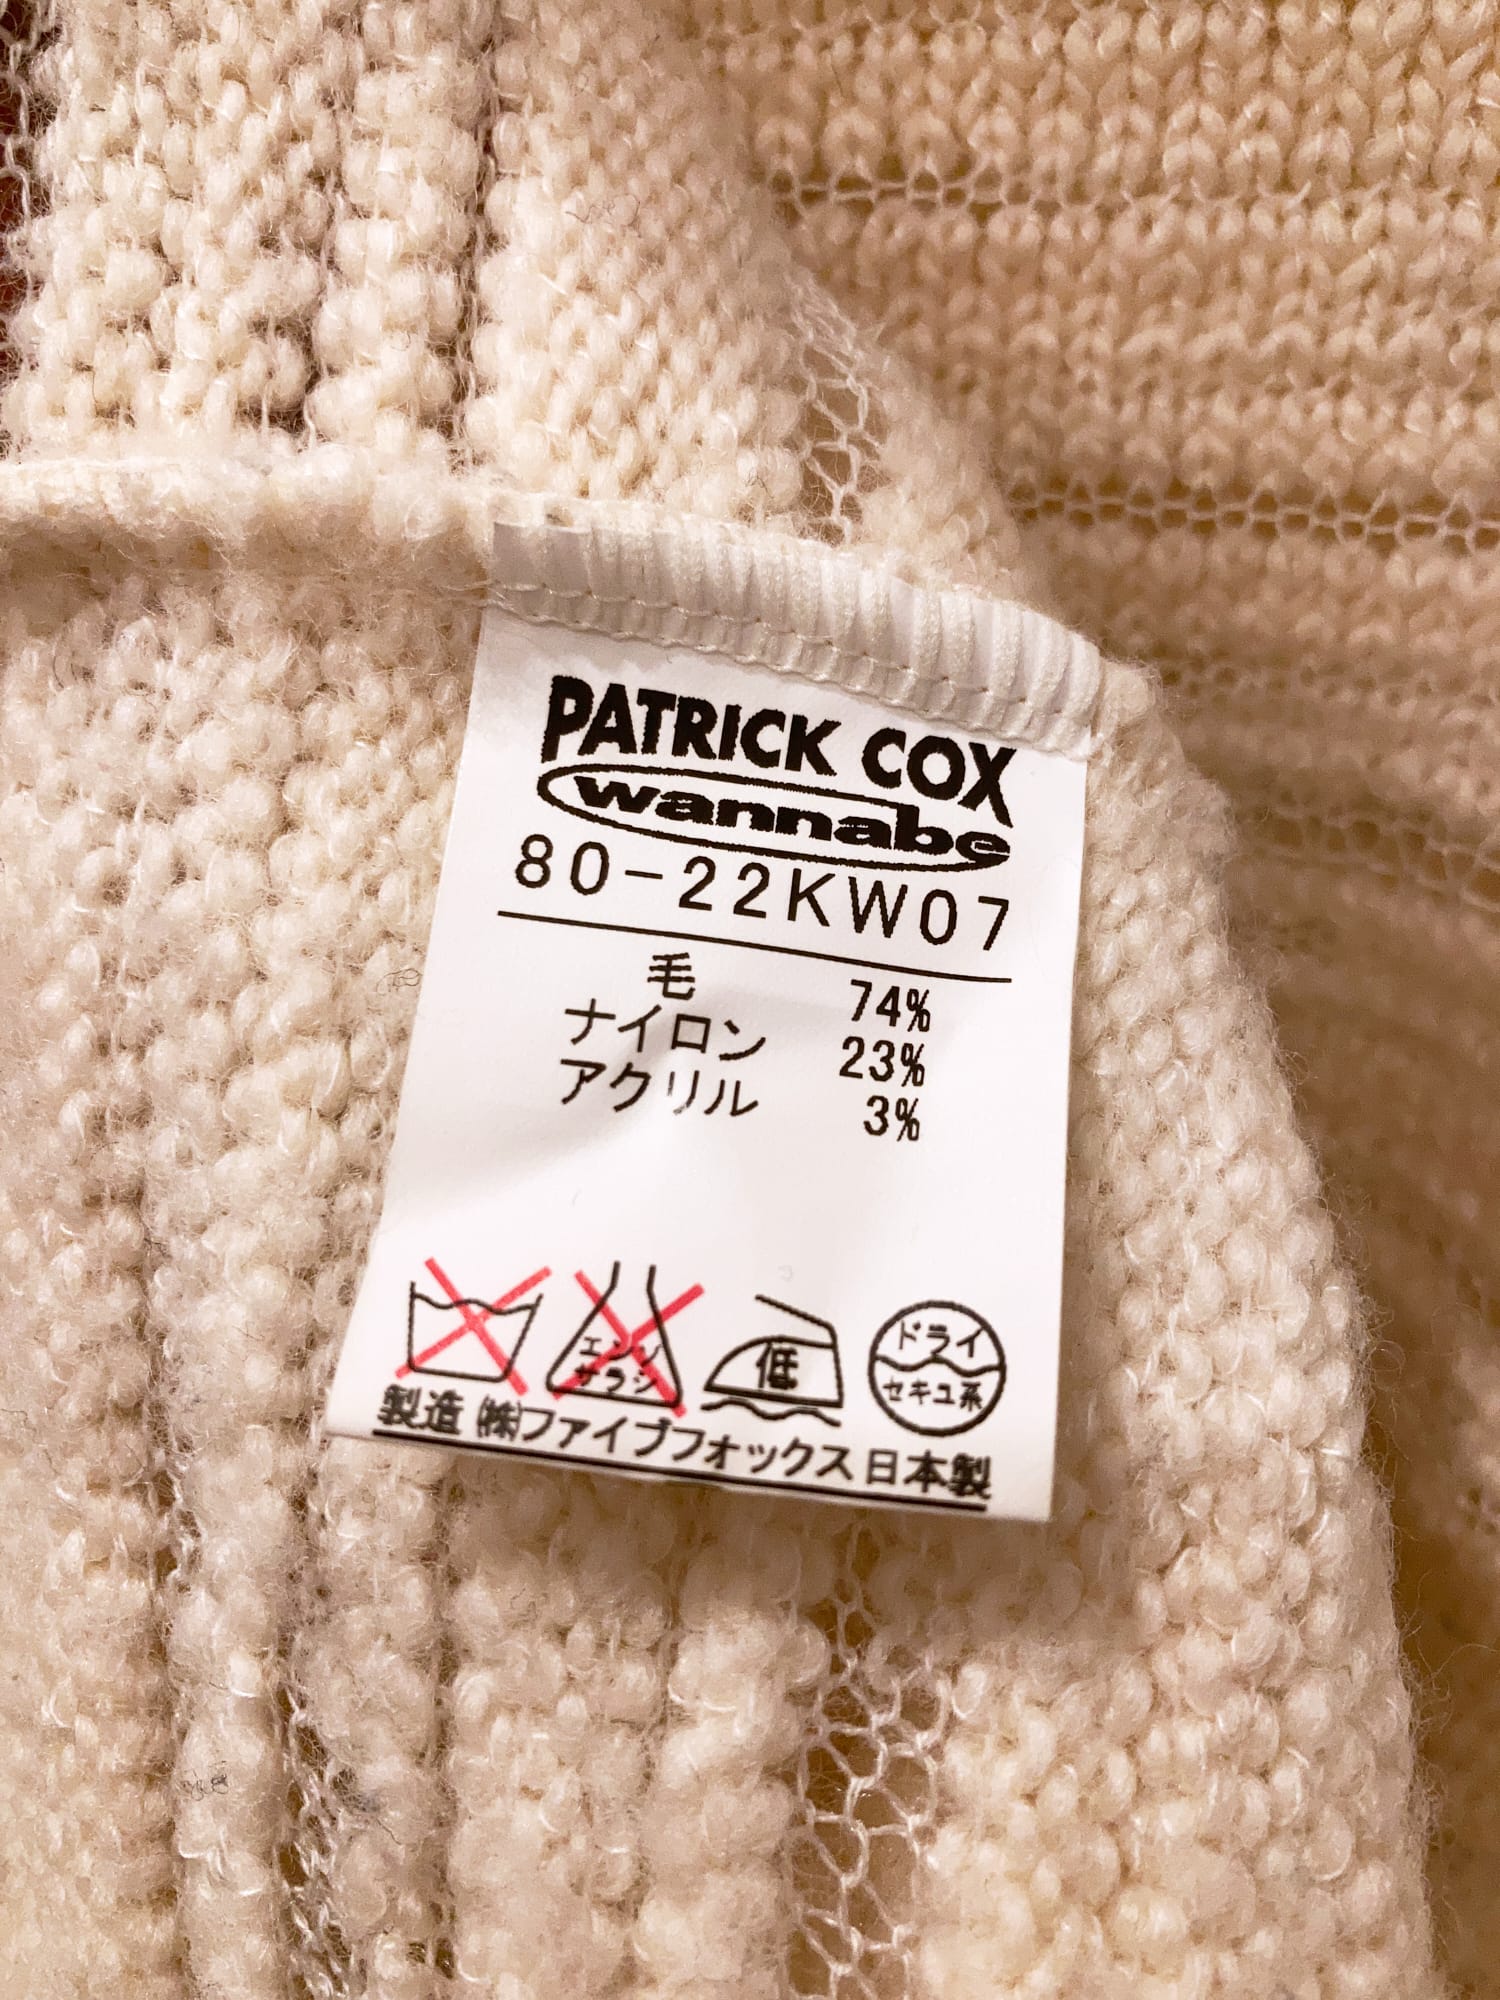 Patrick Cox Wannabe cream wool turtleneck jumper with transparent sections - S M